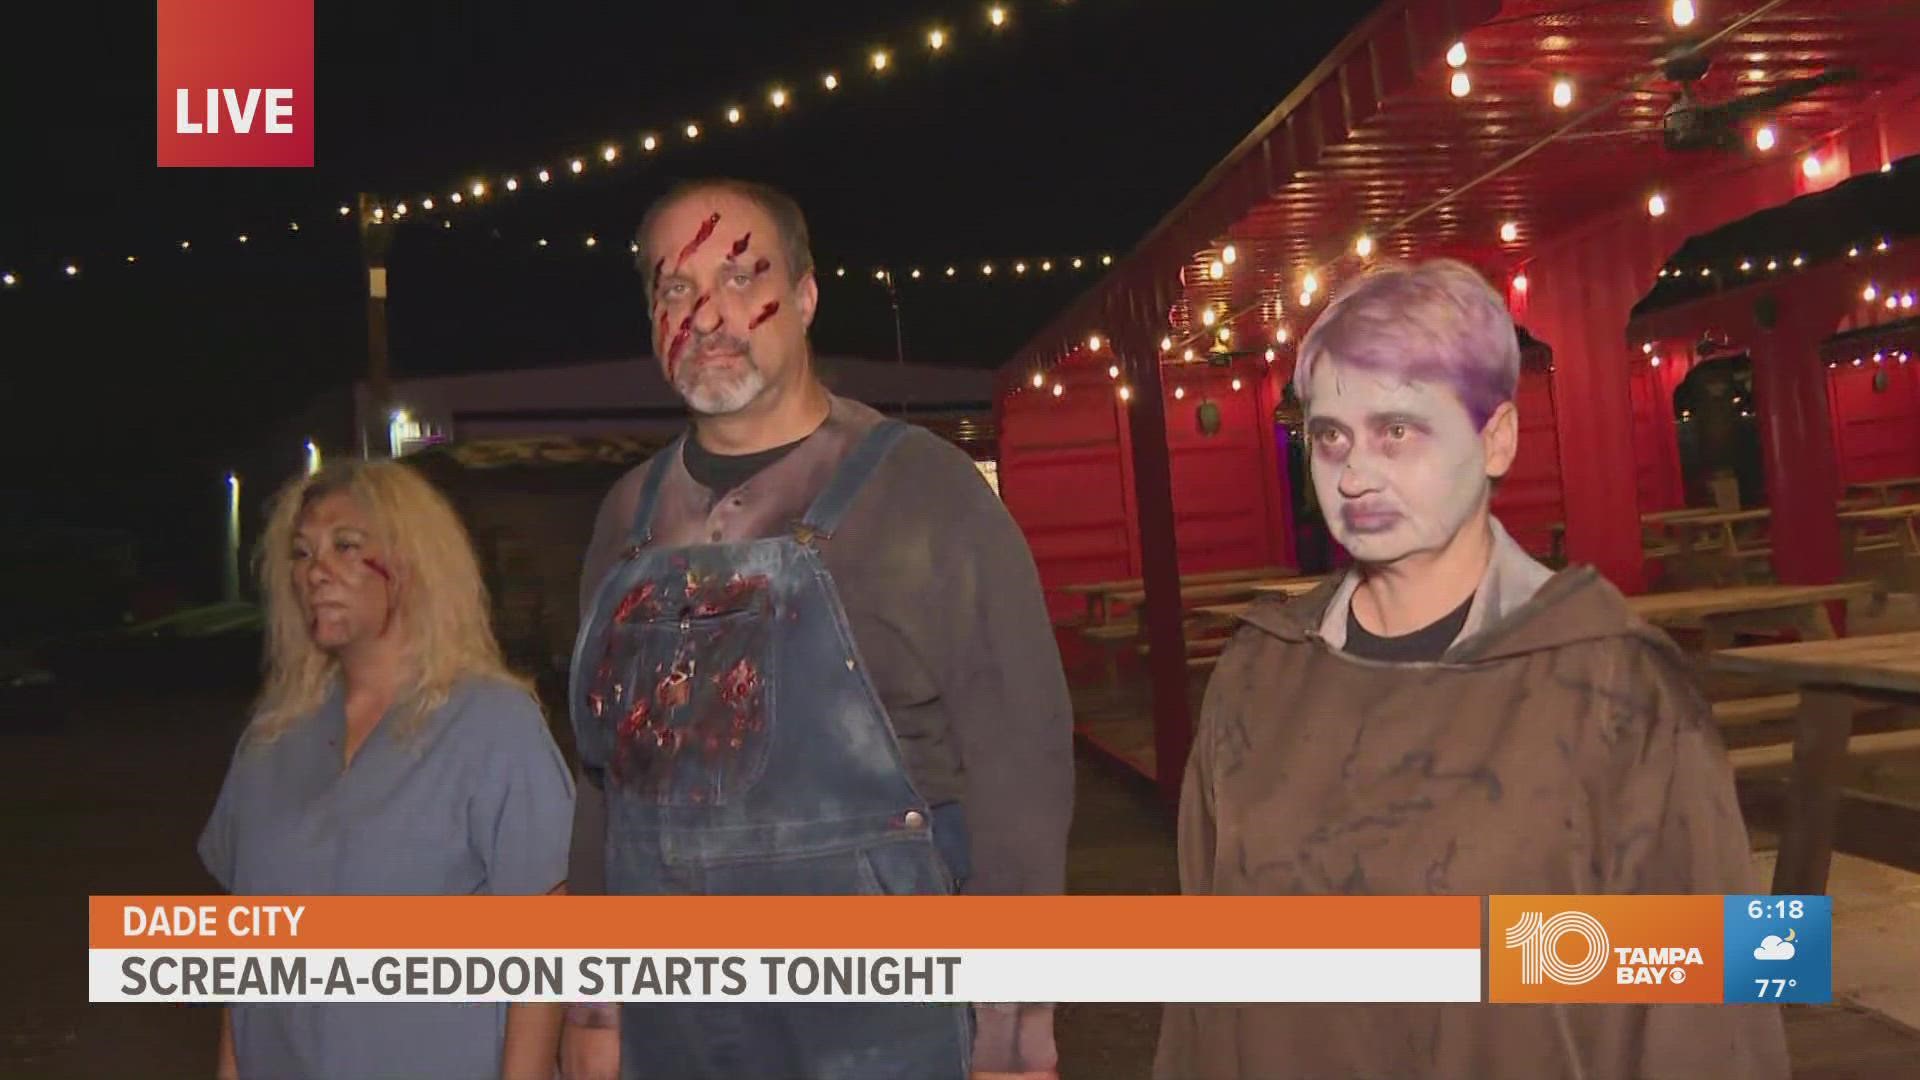 You can your "scare" on in Dade City.